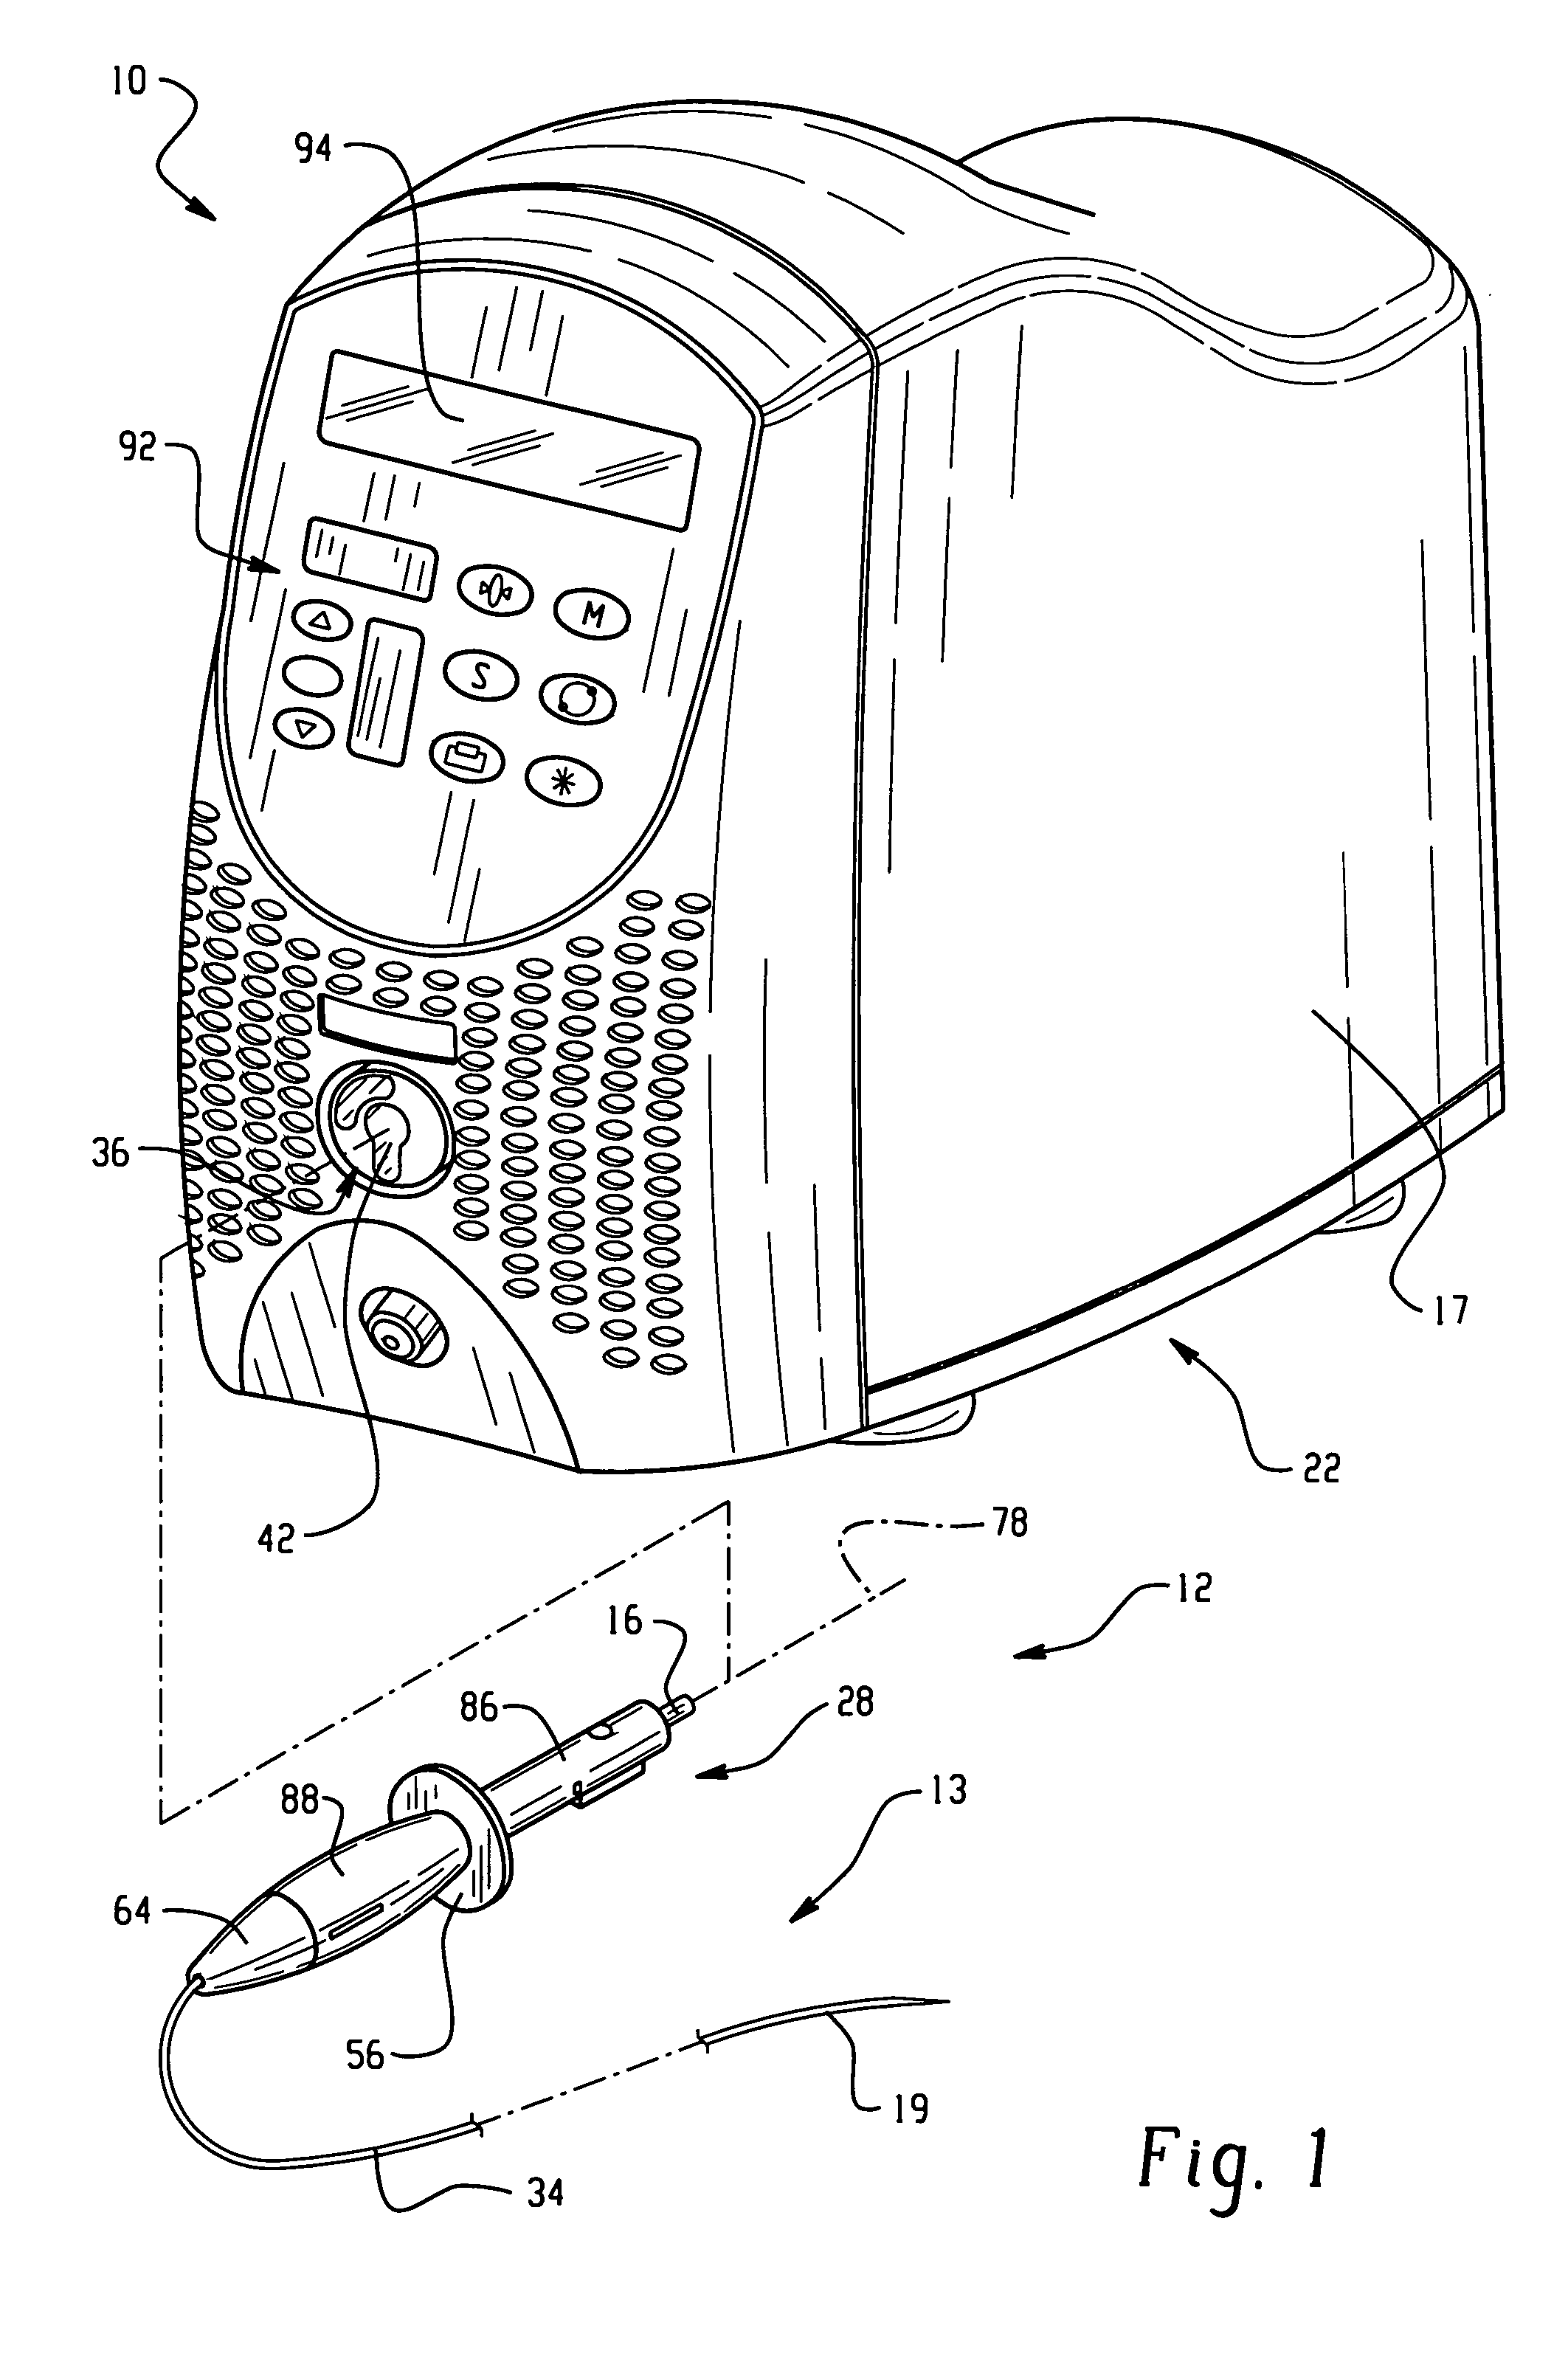 Medical treatment system with energy delivery device for limiting reuse